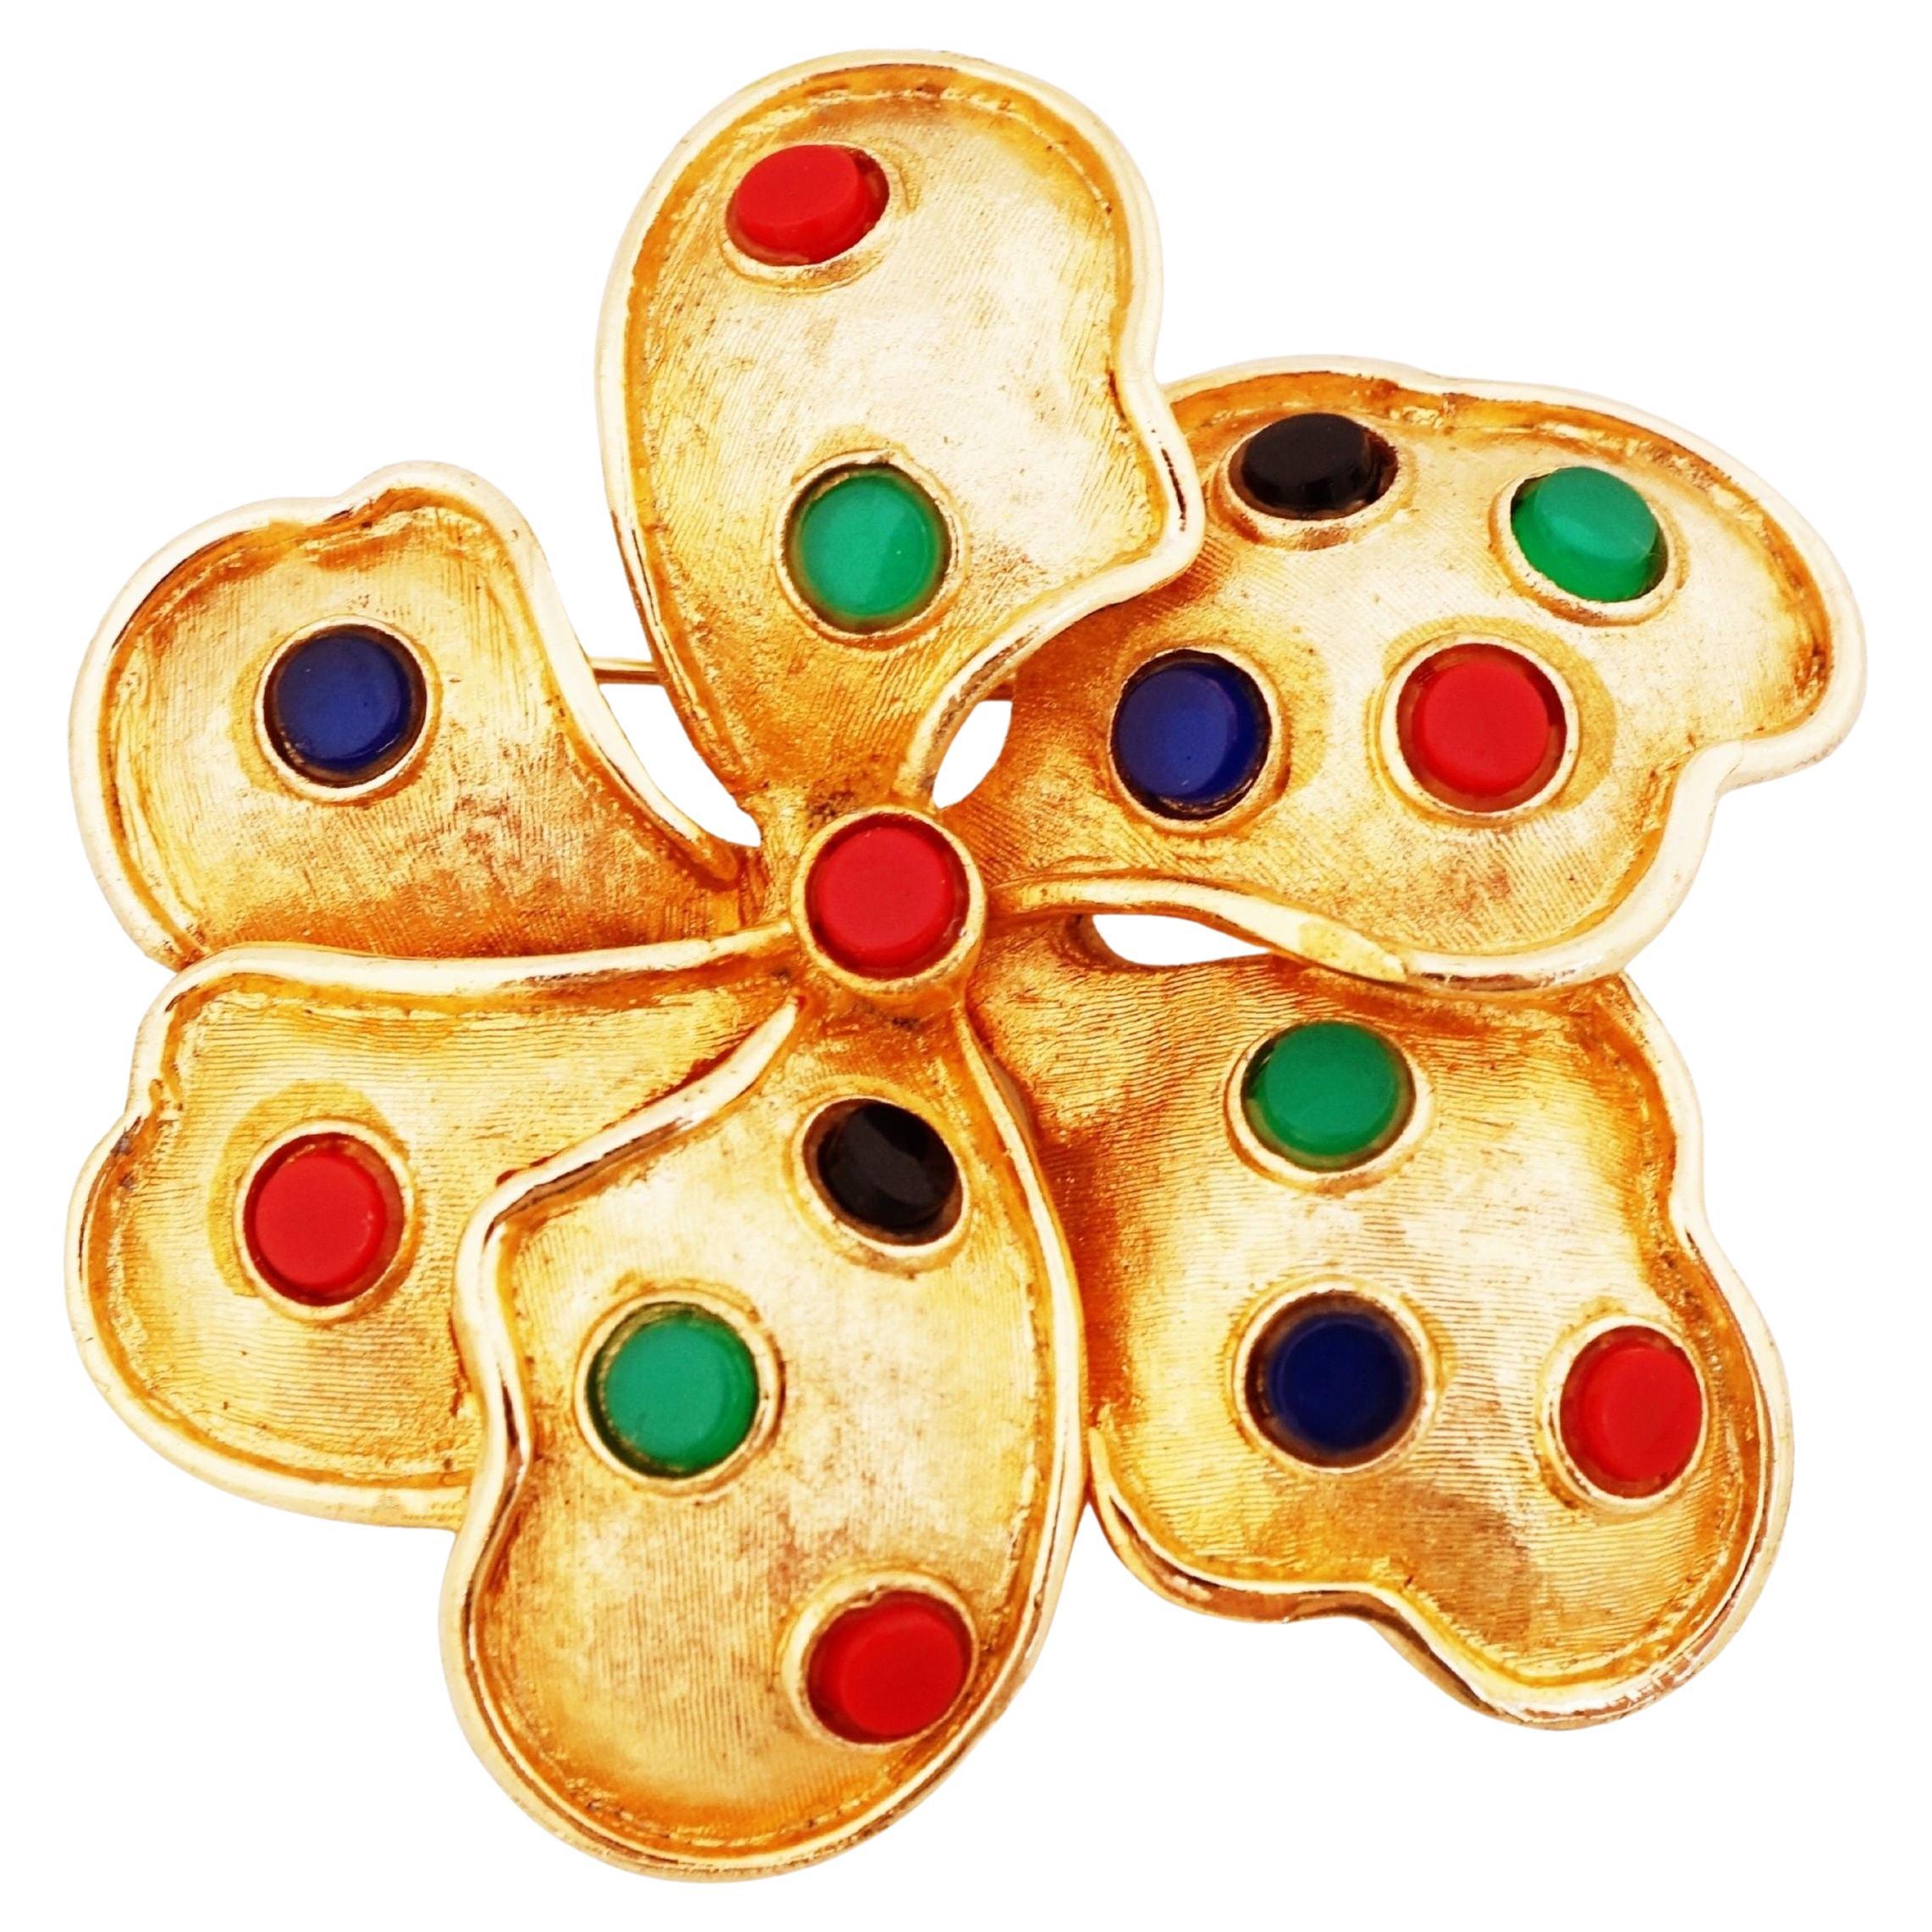 Gilded Mughal Style Flower Brooch With Jewel Tone Cabochons By Kramer, 1960s